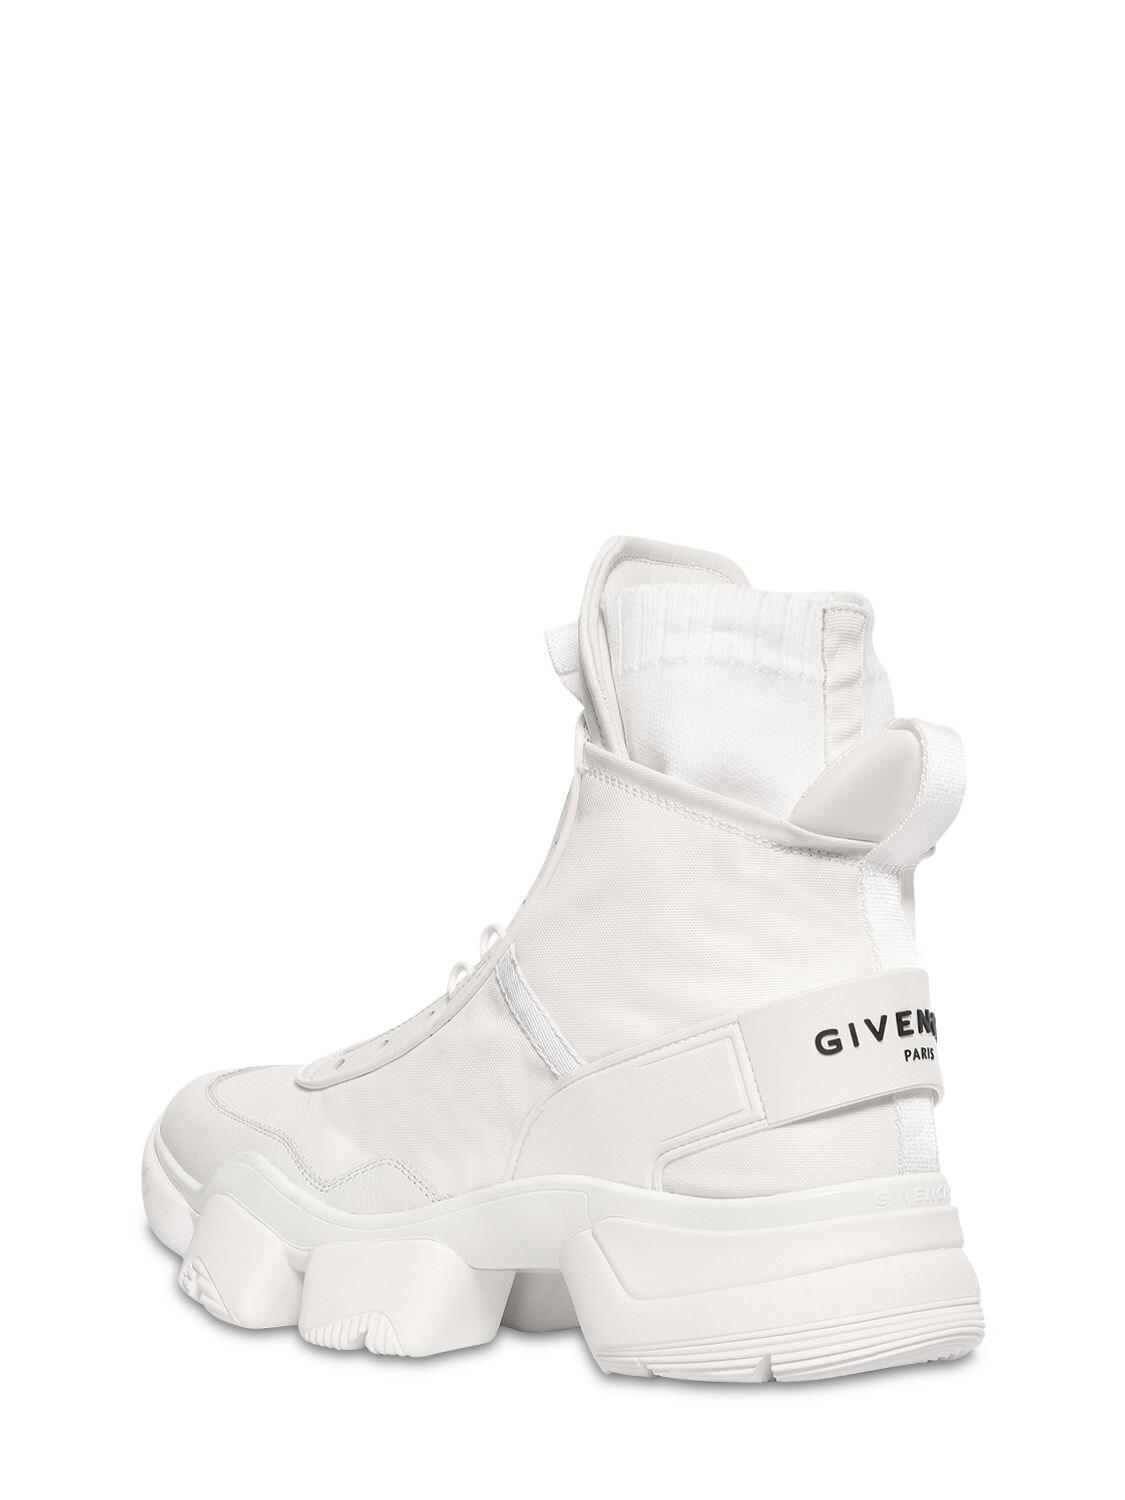 Givenchy Jaw Nylon Sock High Top Sneakers in White for Men - Lyst